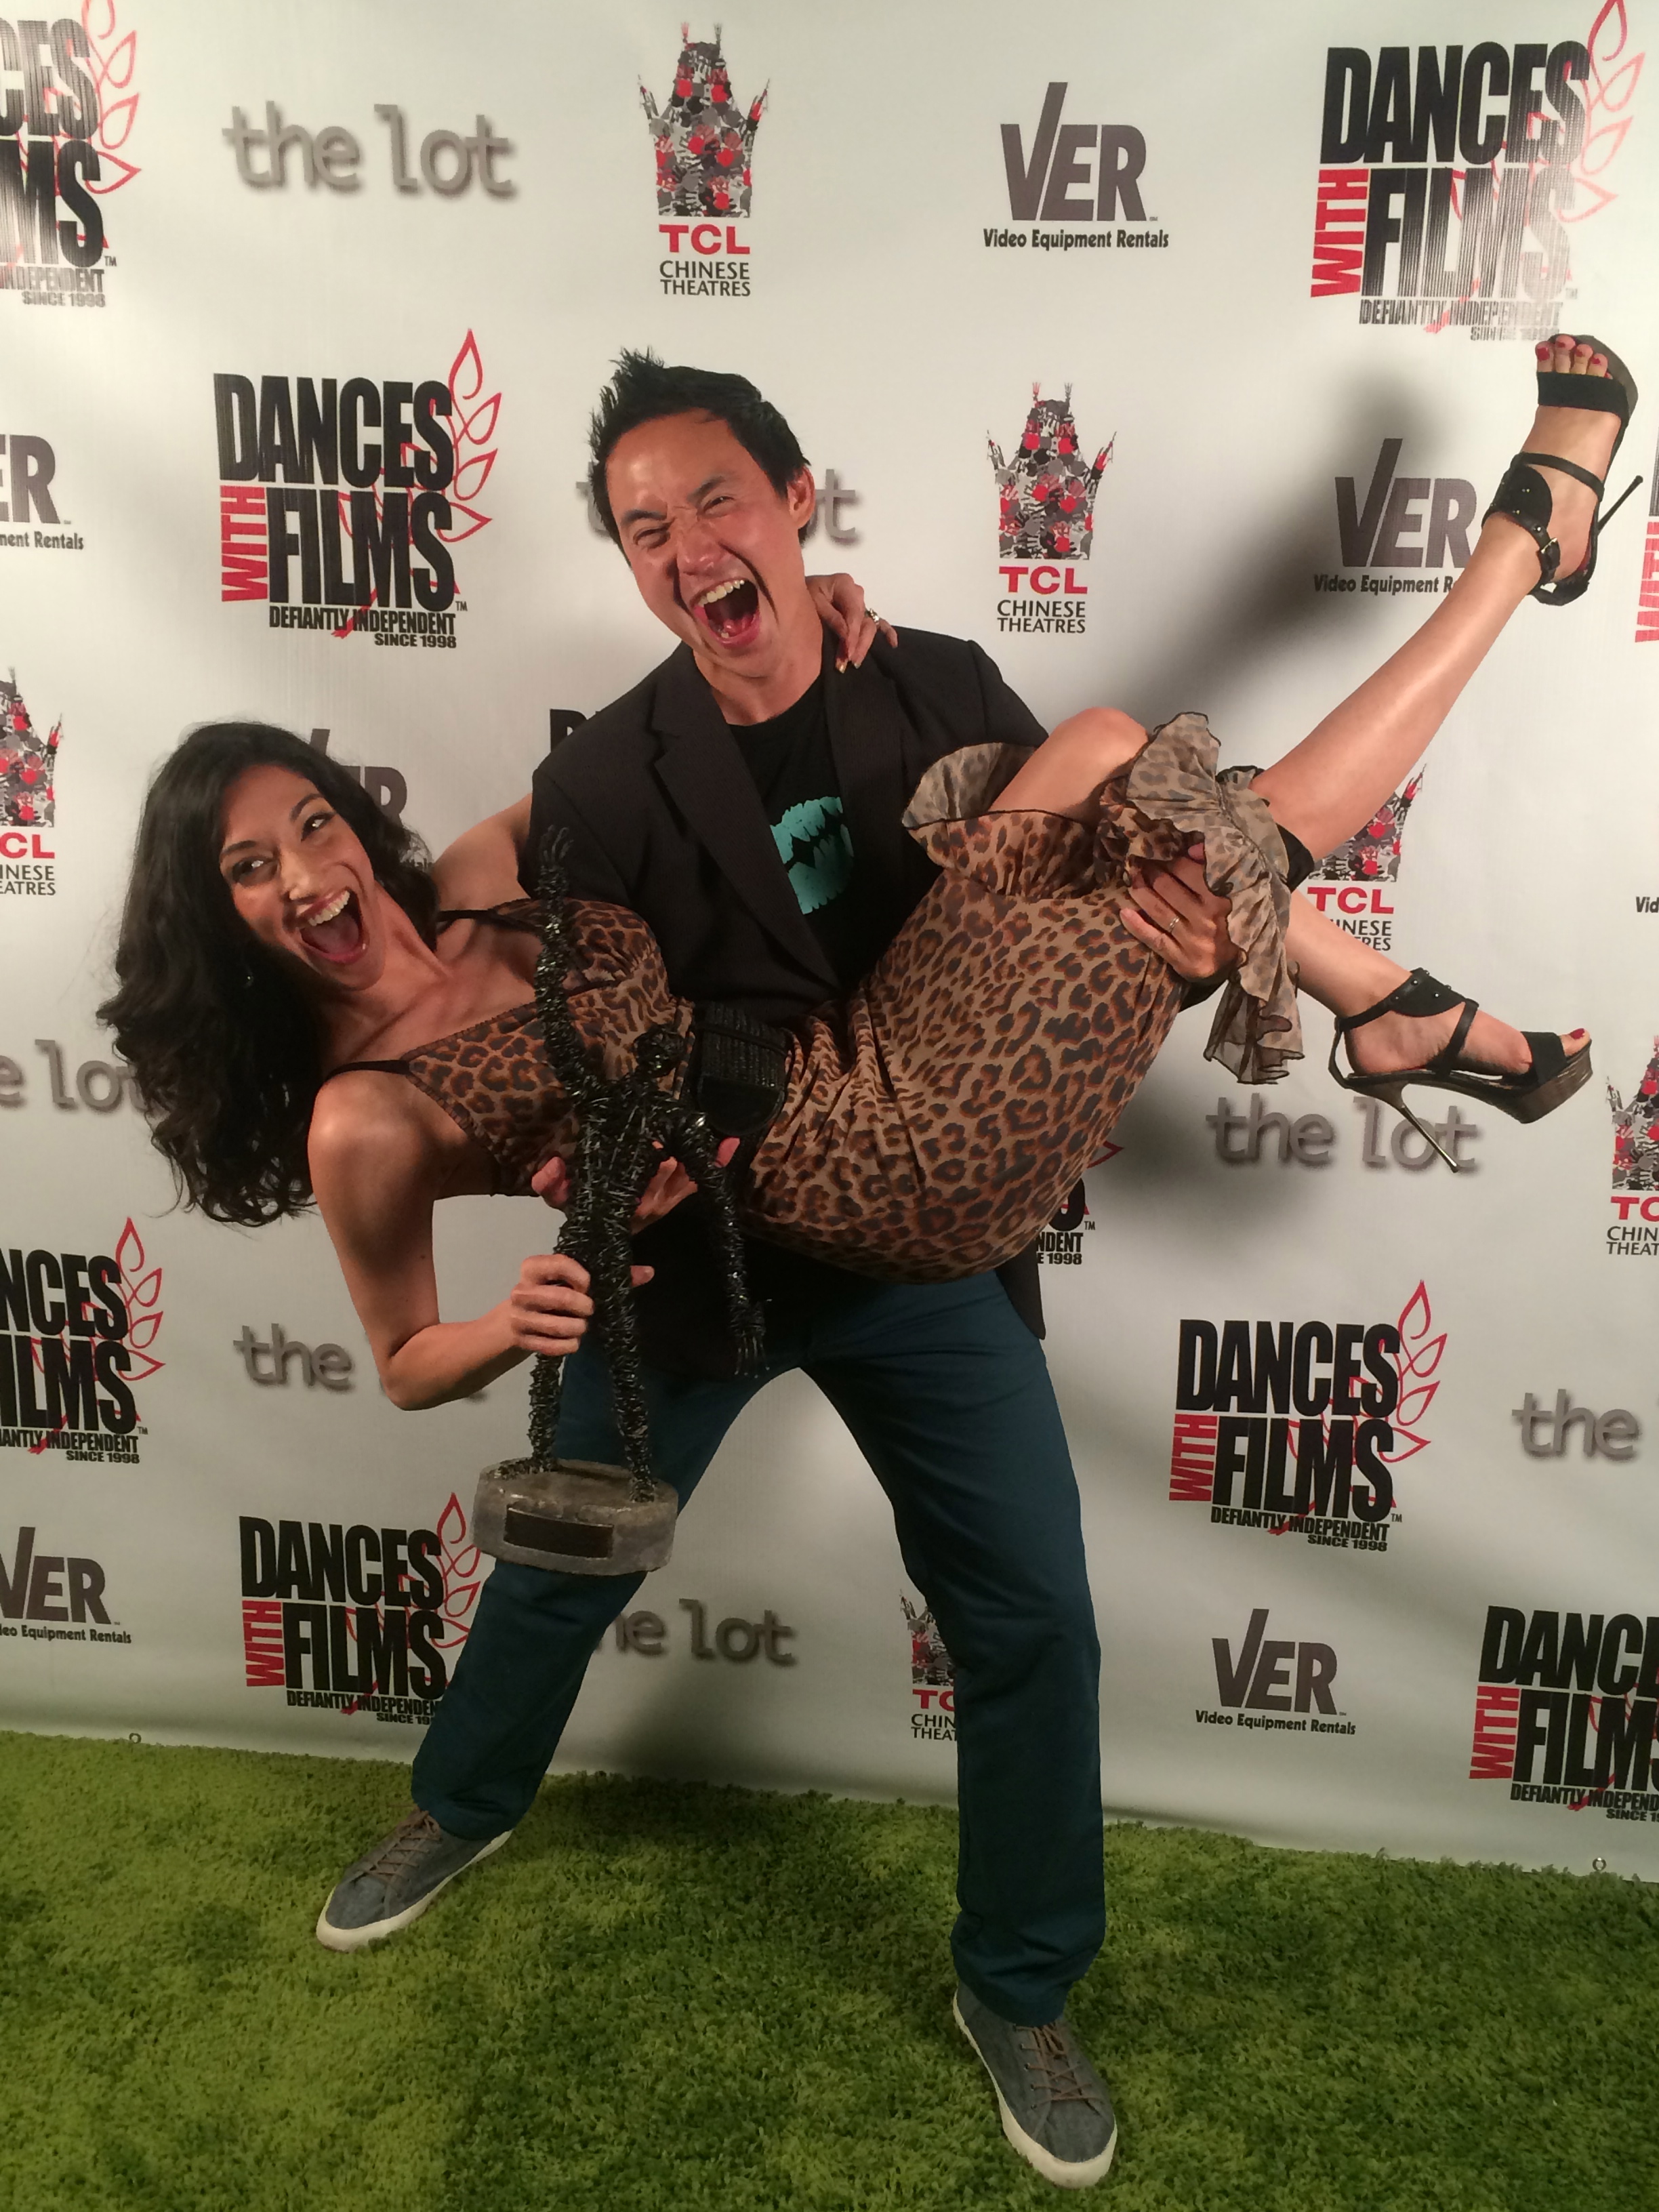 2014 Dances With Films Grand Jury Award for Celluloid Dreams on the Green Carpet